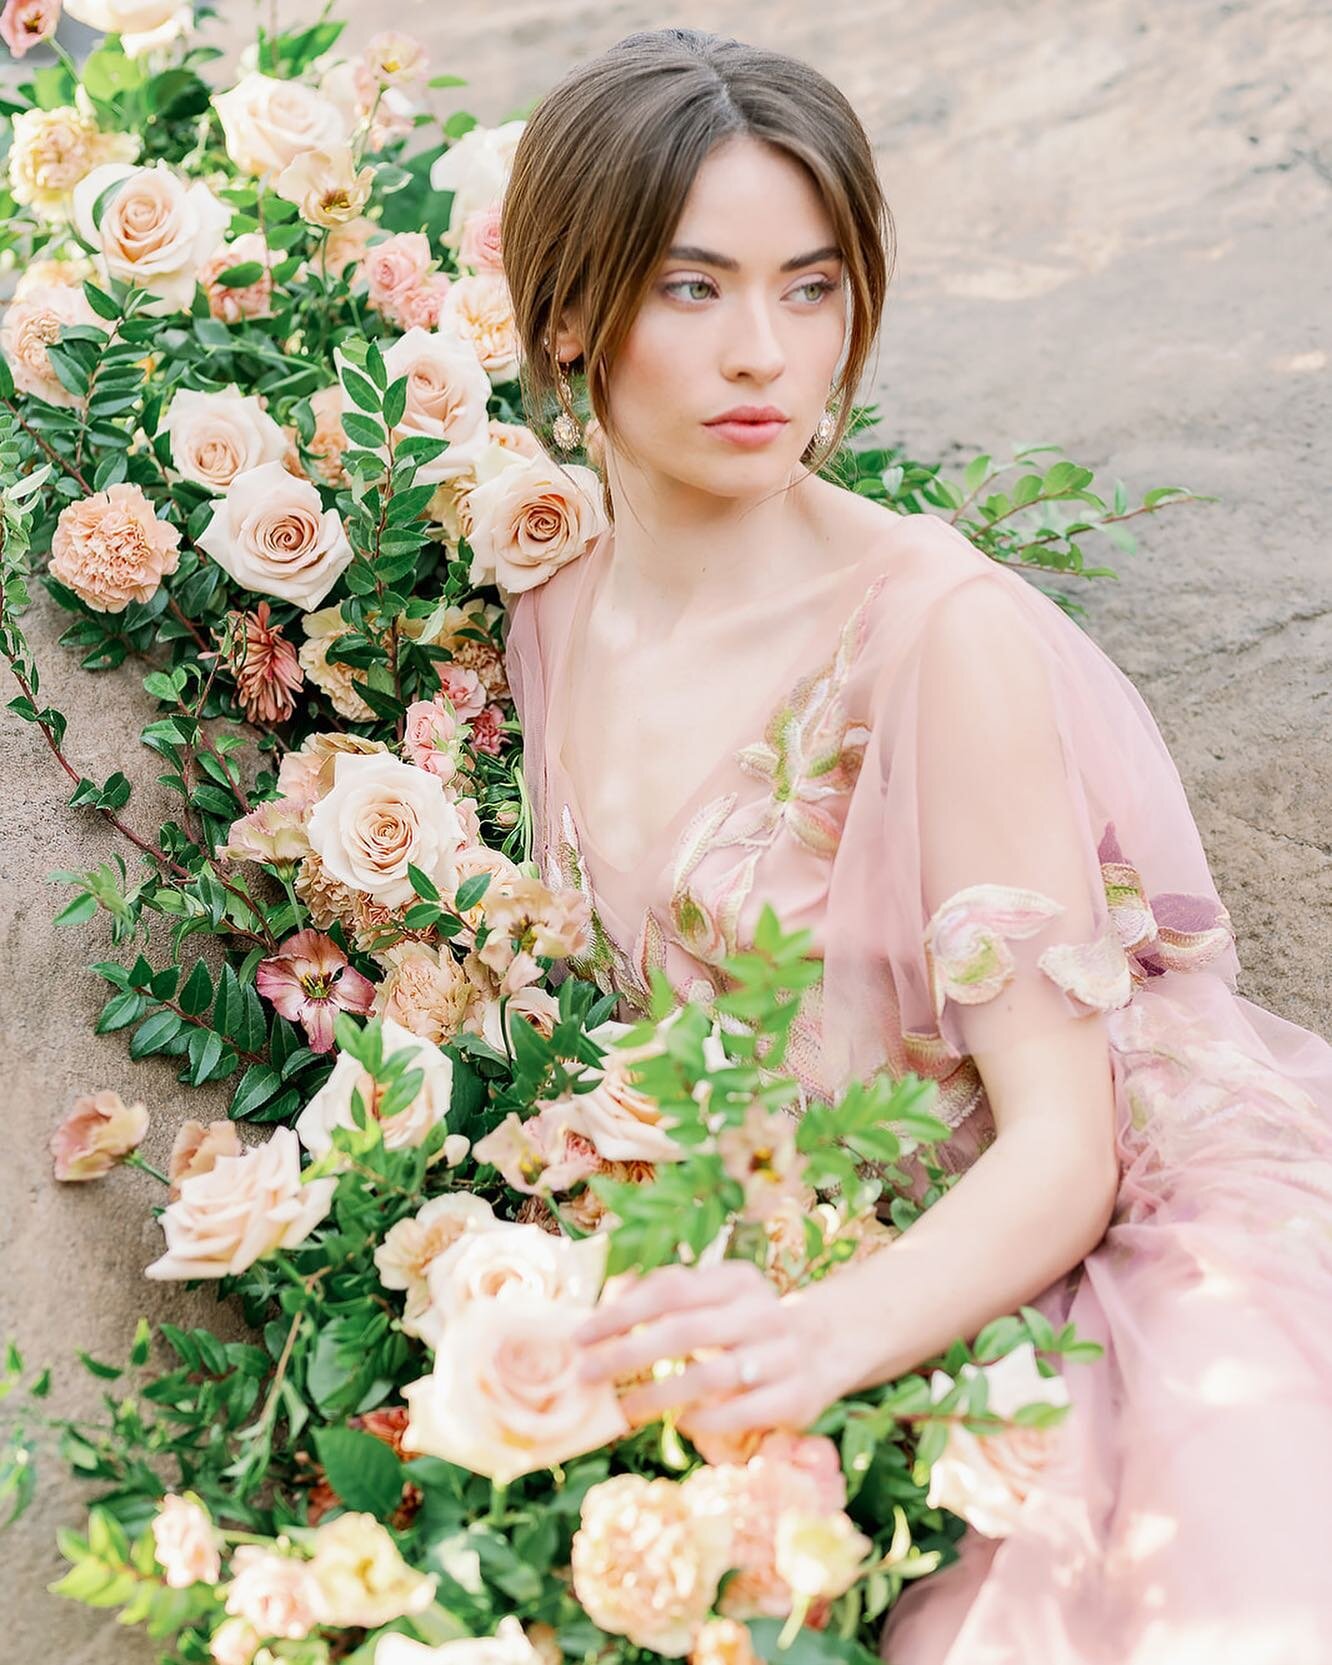 Time to relax in a stream of roses- it&rsquo;s the weekend 💫

Photography @iannivy 
Hair &amp; Makeup @thequeensbees 
Model @carlimaedugan 
Venue @villaloriana.slo 
Styling @overthemoon_event_co